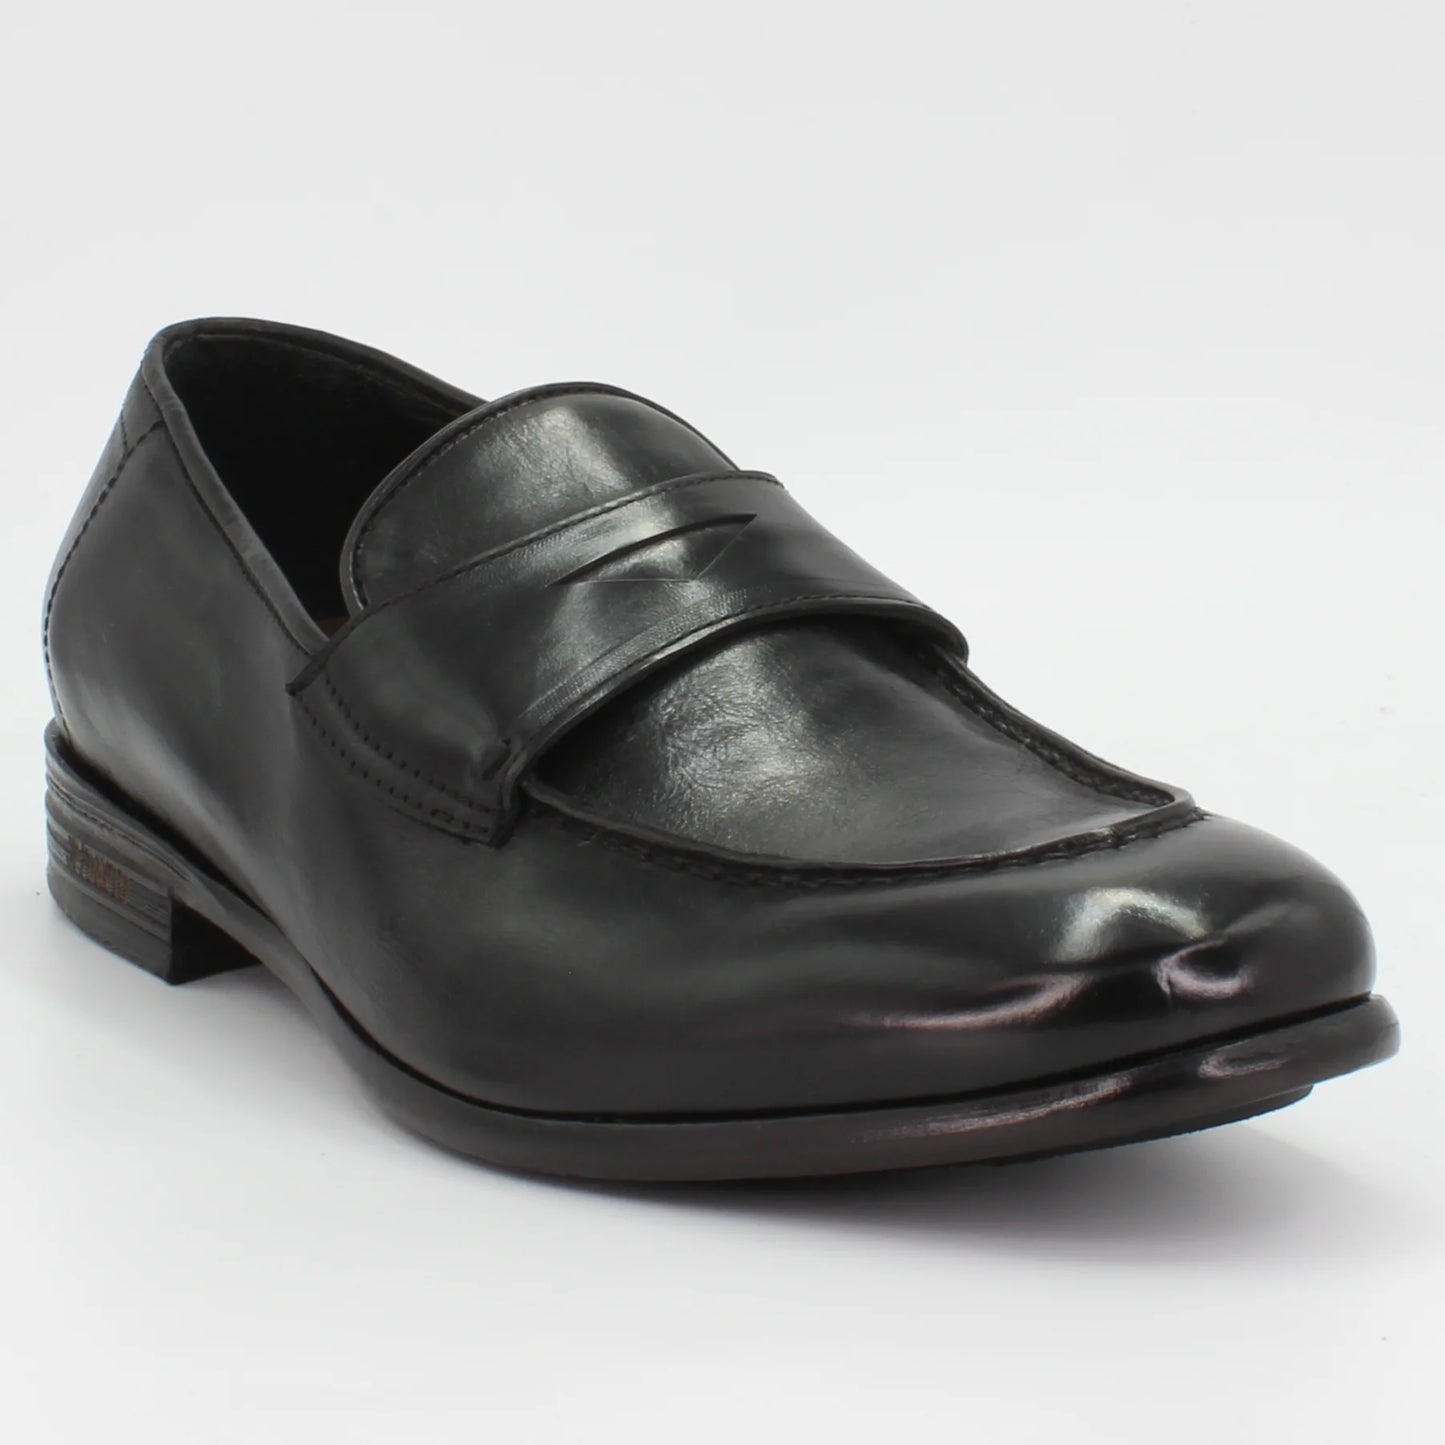 Shop Handmade Italian Leather moccasin in nero (JP37012/6) or browse our range of hand-made Italian shoes for men in leather or suede in-store at Aliverti Cape Town, or shop online. We deliver in South Africa & offer multiple payment plans as well as accept multiple safe & secure payment methods.